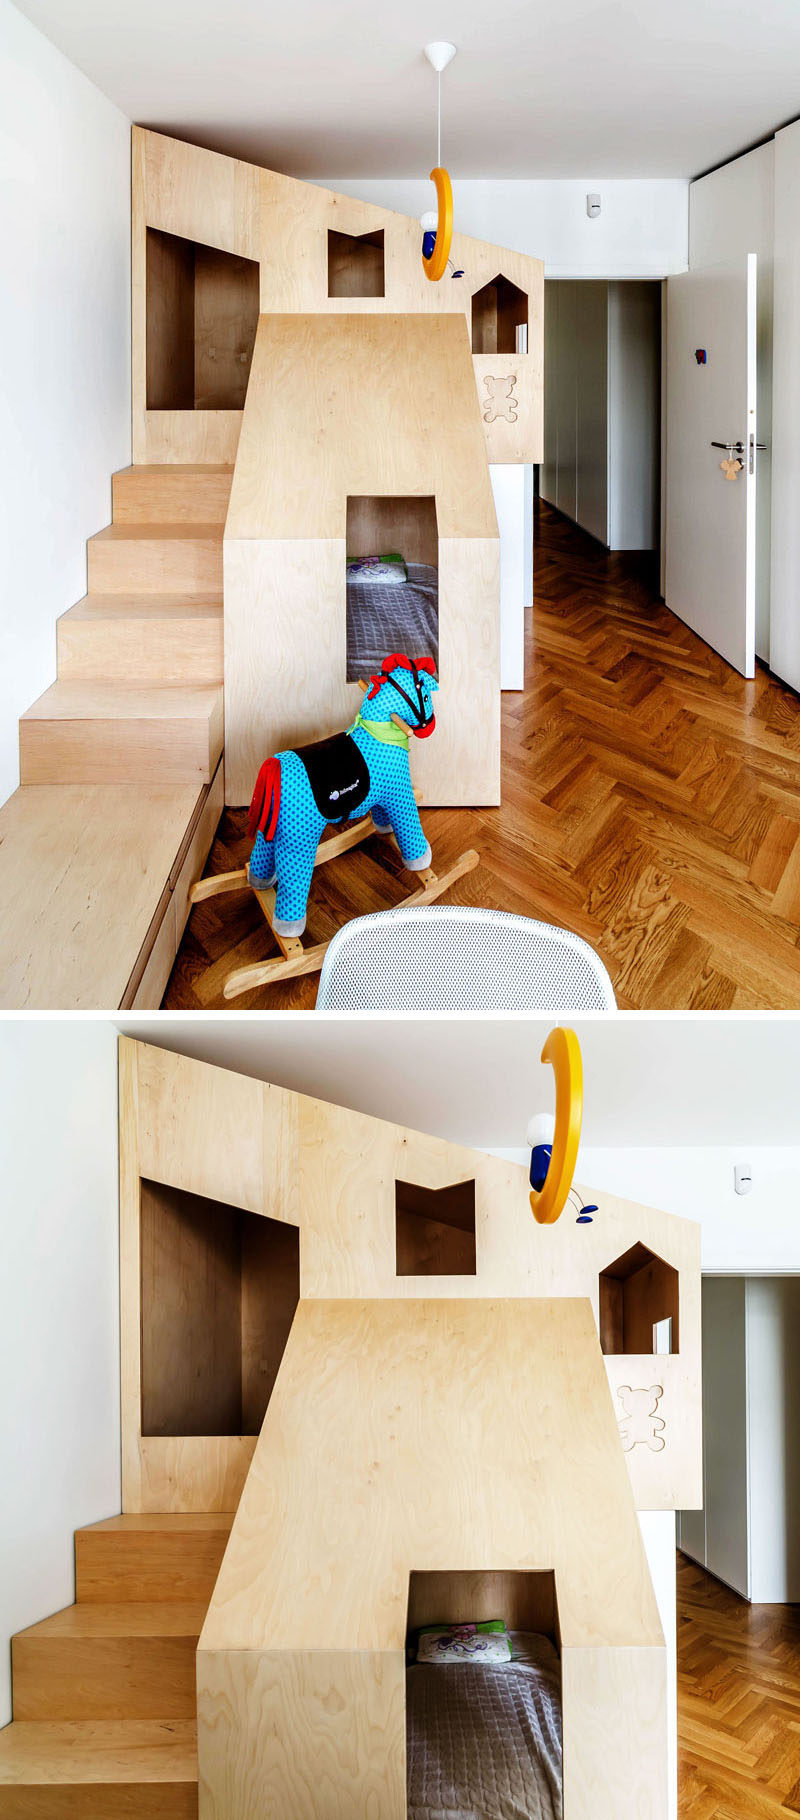 A Custom Bunk Bed Tucks Neatly Into This Small Kids Room ...